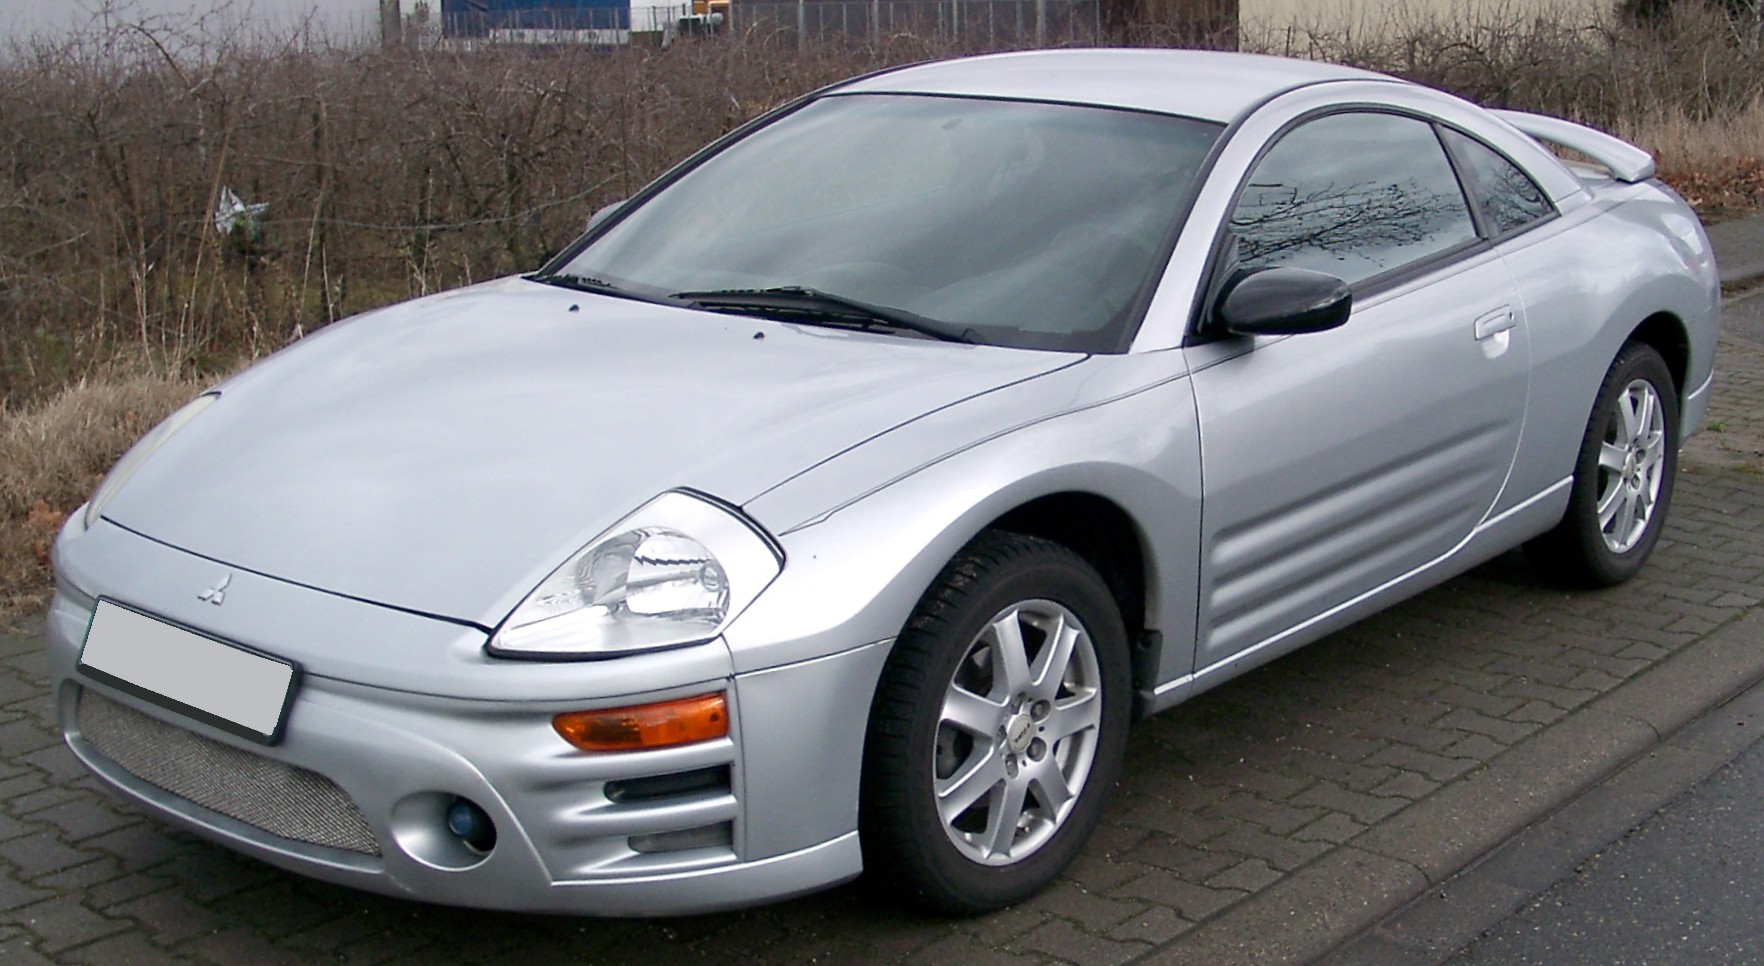 2012 Mitsubishi Eclipse Review, Ratings, Specs, Prices, and Photos